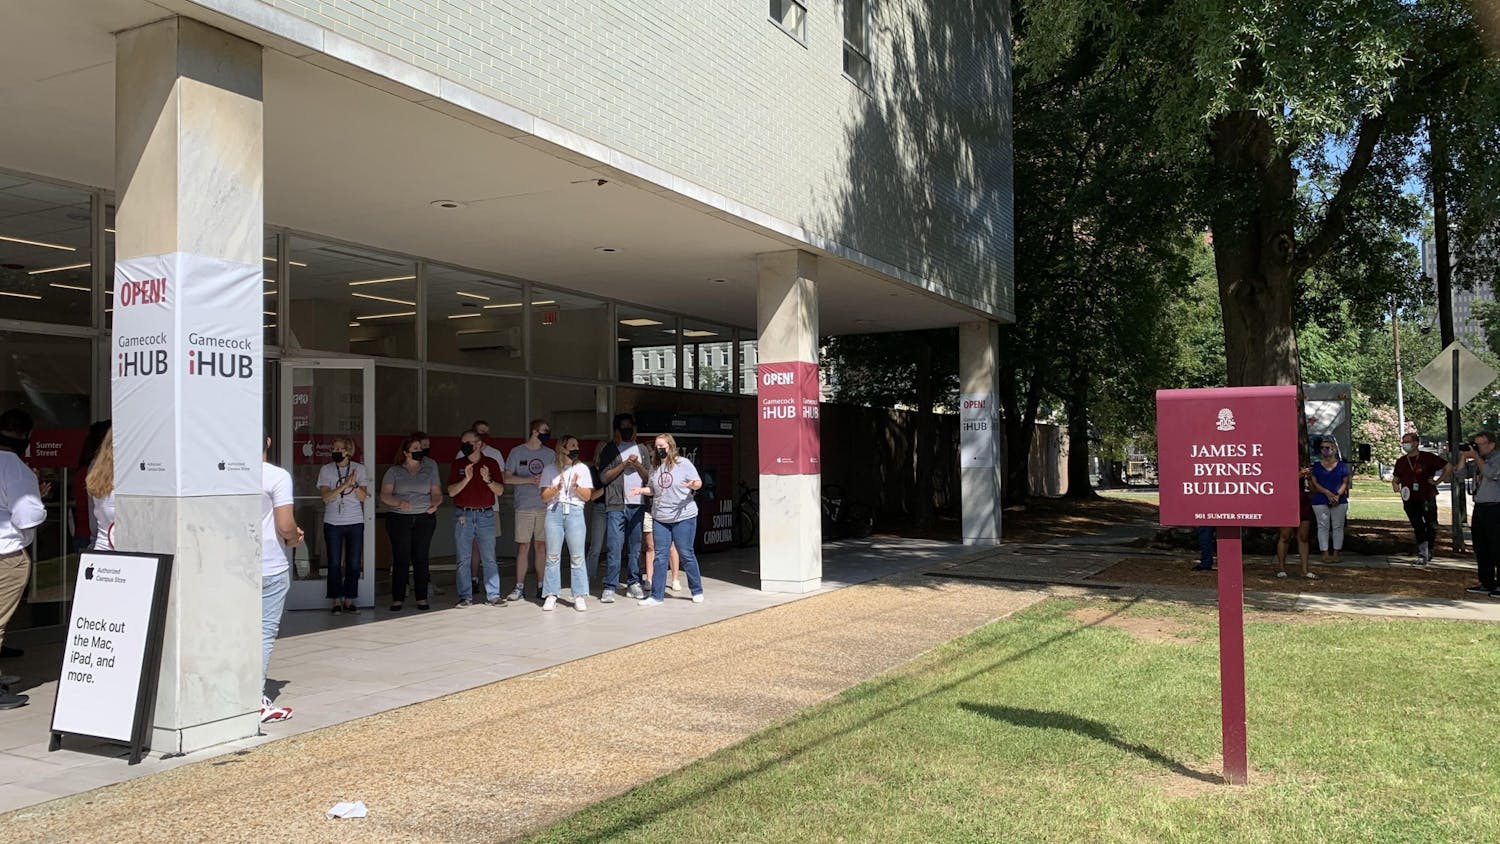 Students working at the new iHub clap as people enter the store. The store opened Aug. 13, 2021, and will service and provide Apple products to the USC community.